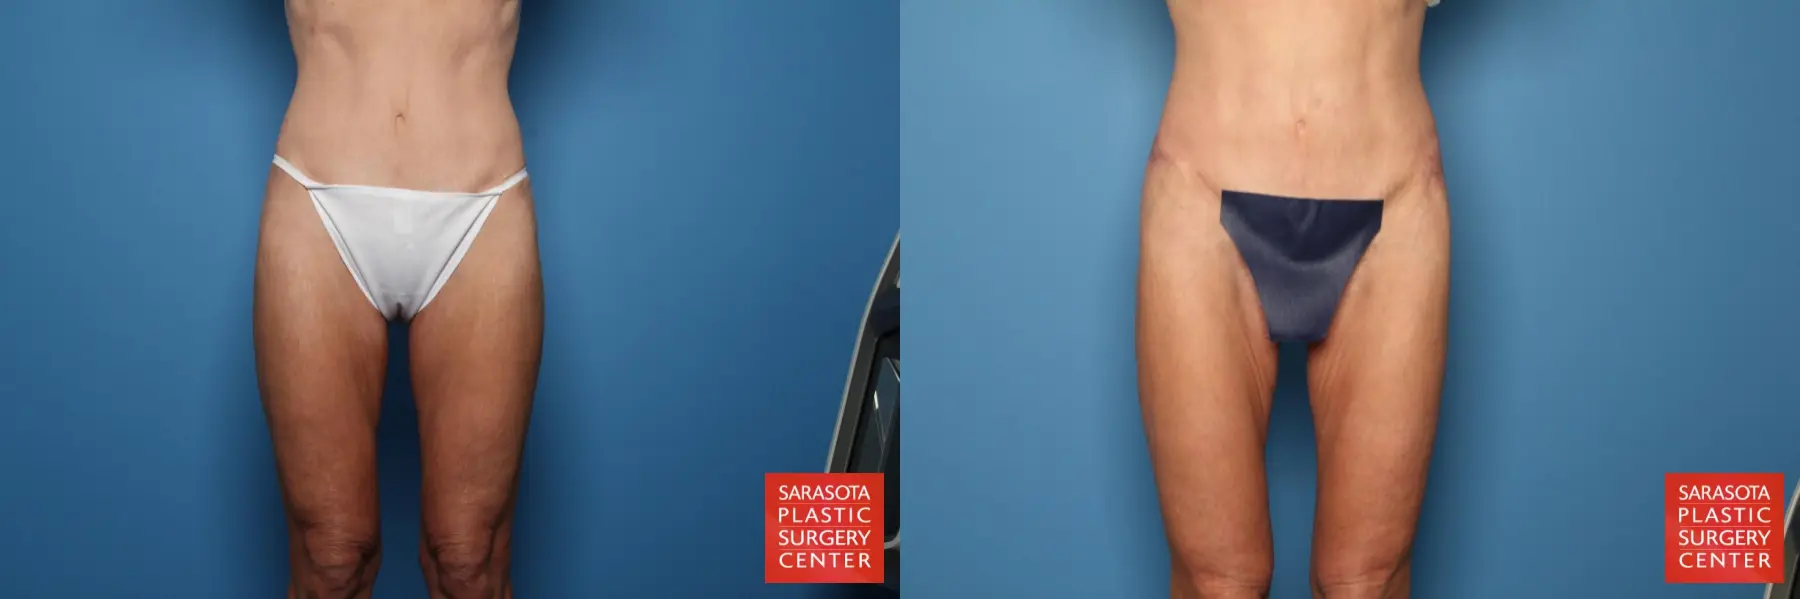 Thigh Lift: Patient 3 - Before and After  